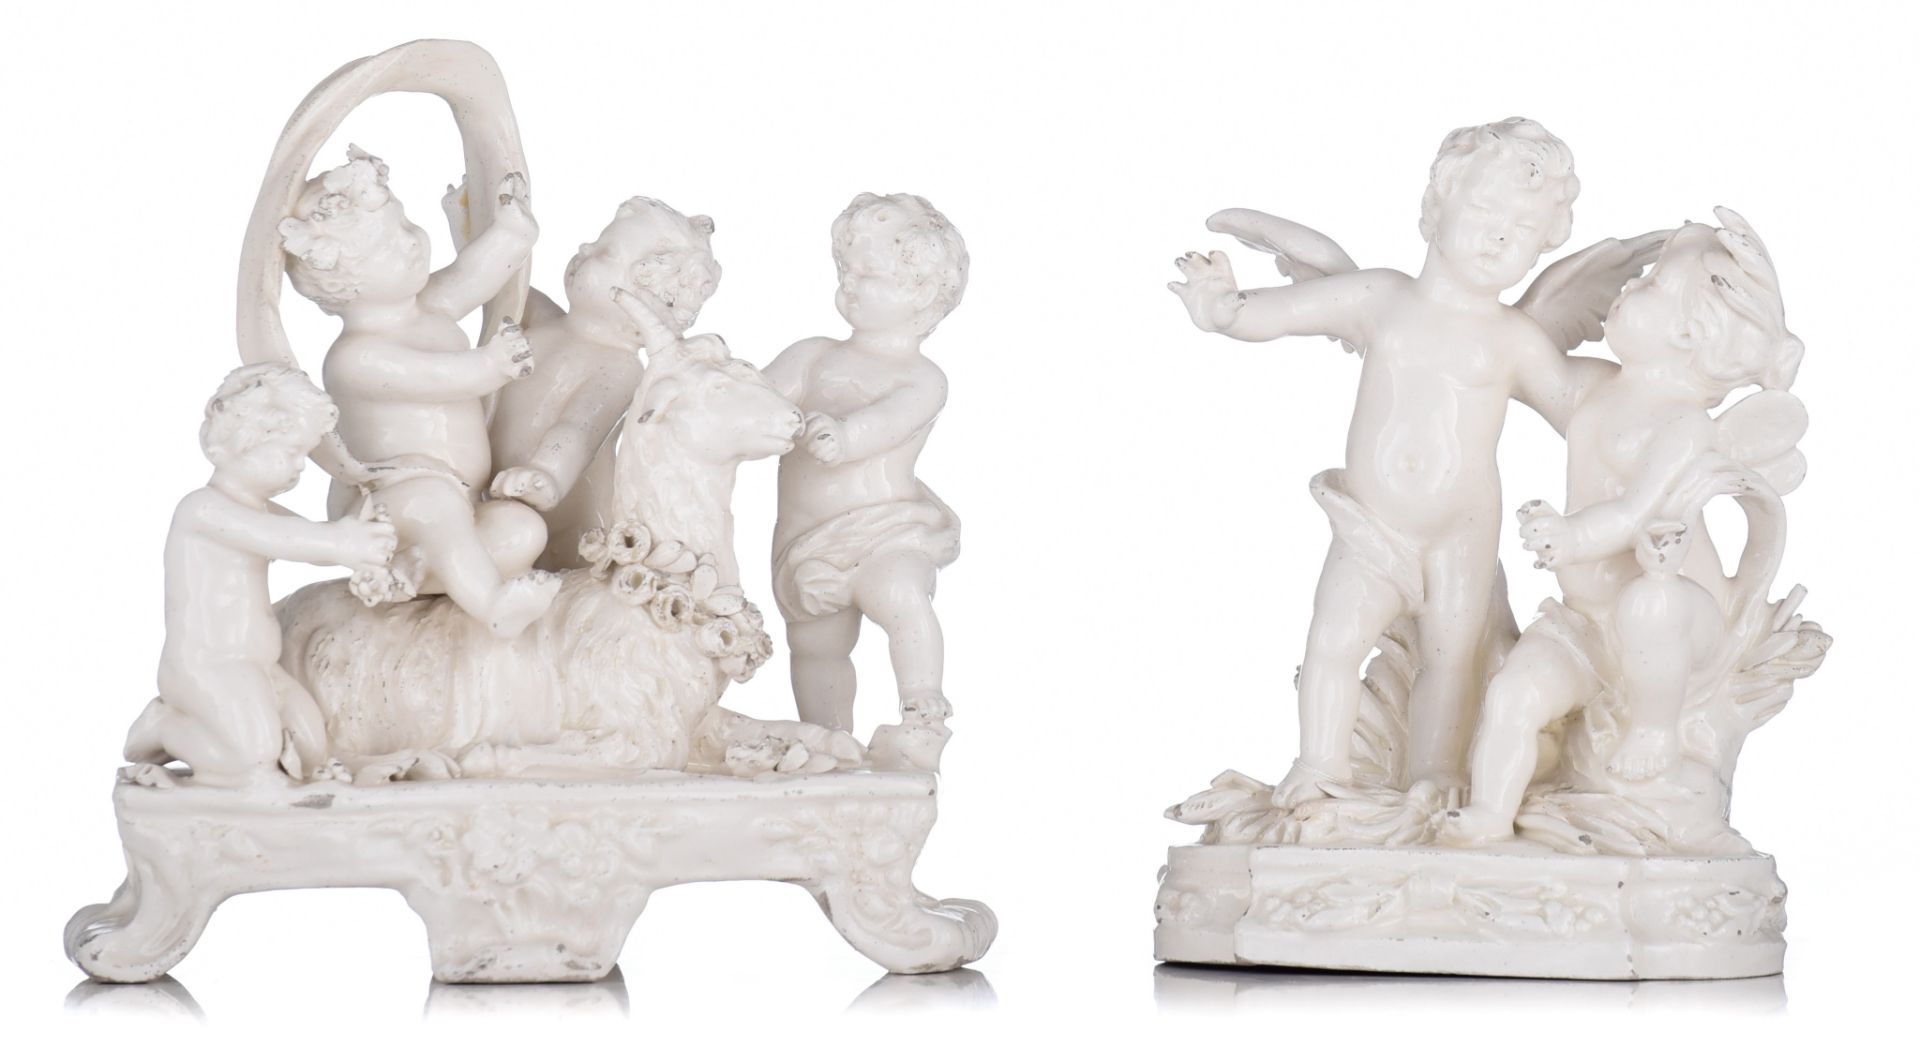 (BIDDING ONLY ON CARLOBONTE.BE) Two white glazed Capodimonte figural groups, Naples, H 20 - 23 cm